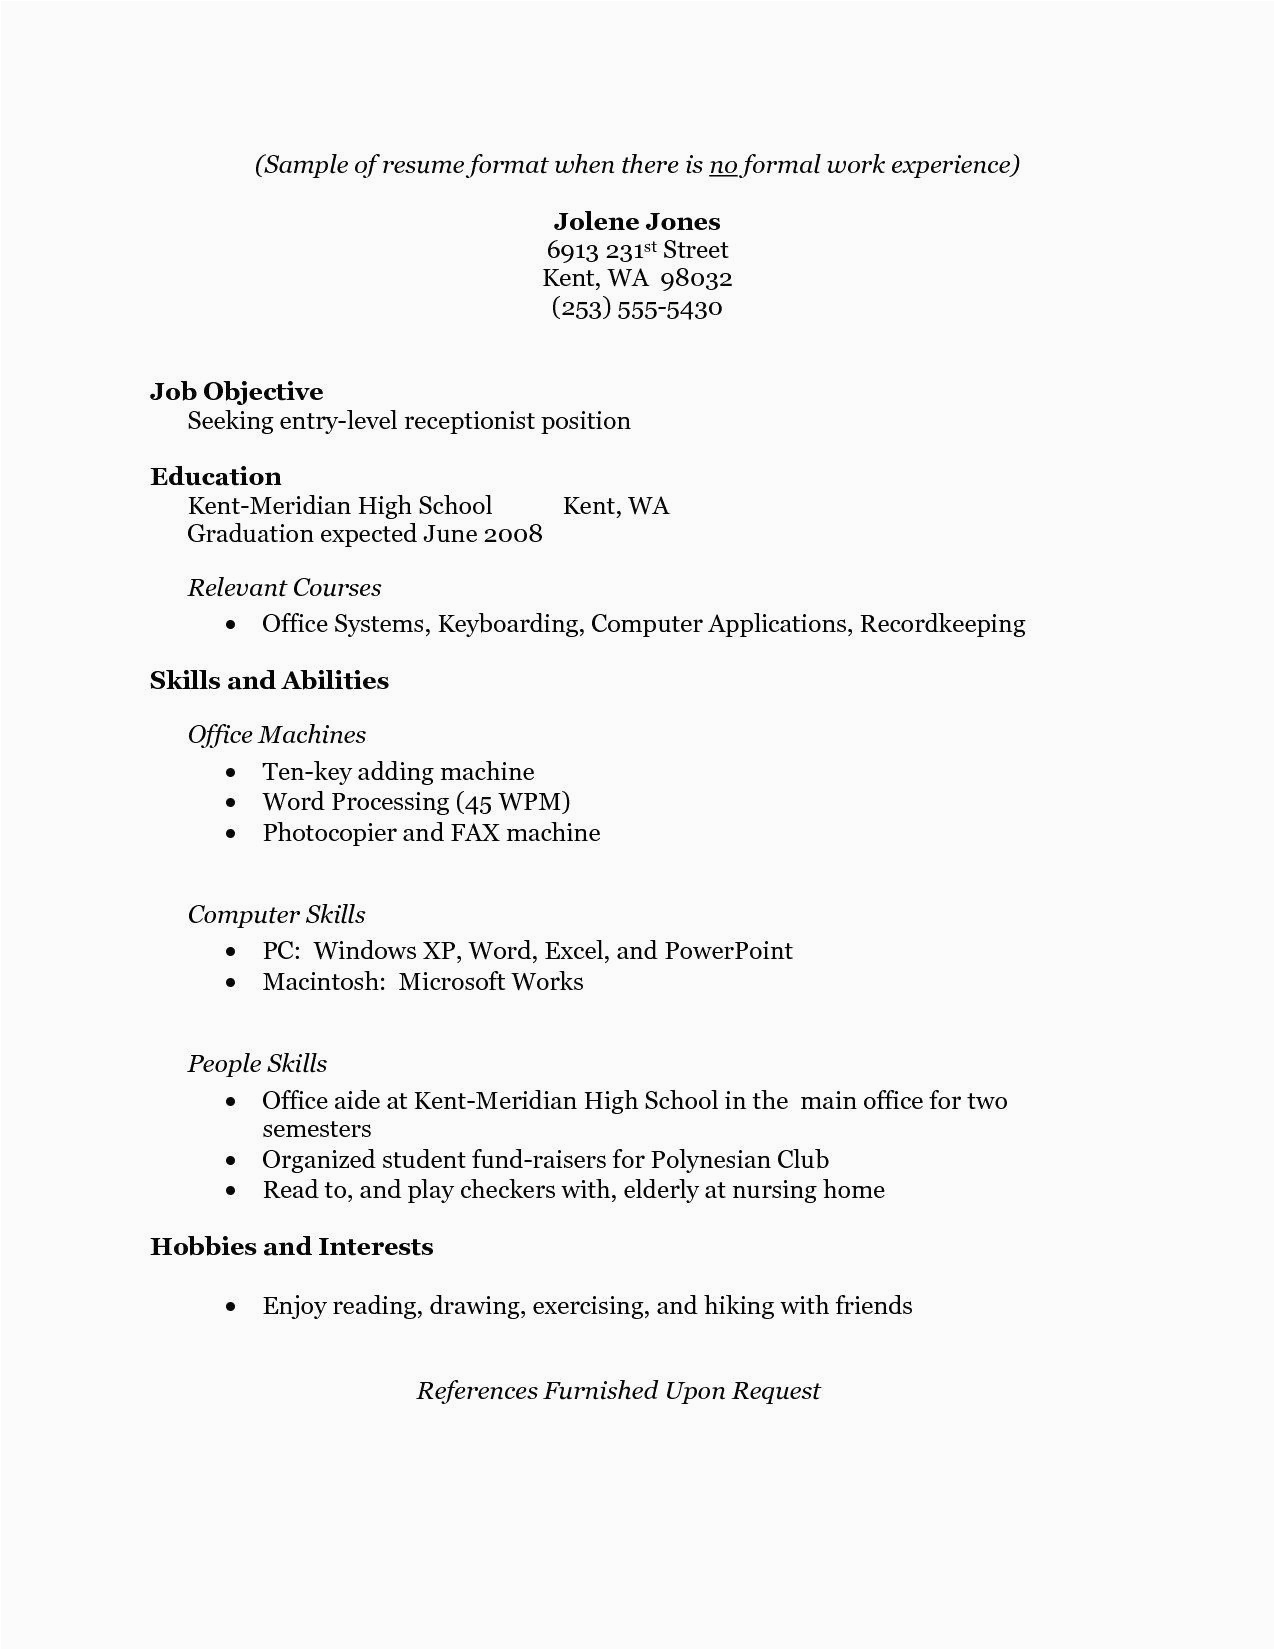 Resume Samples for Receptionist with No Experience Resume for Receptionist with No Experience™